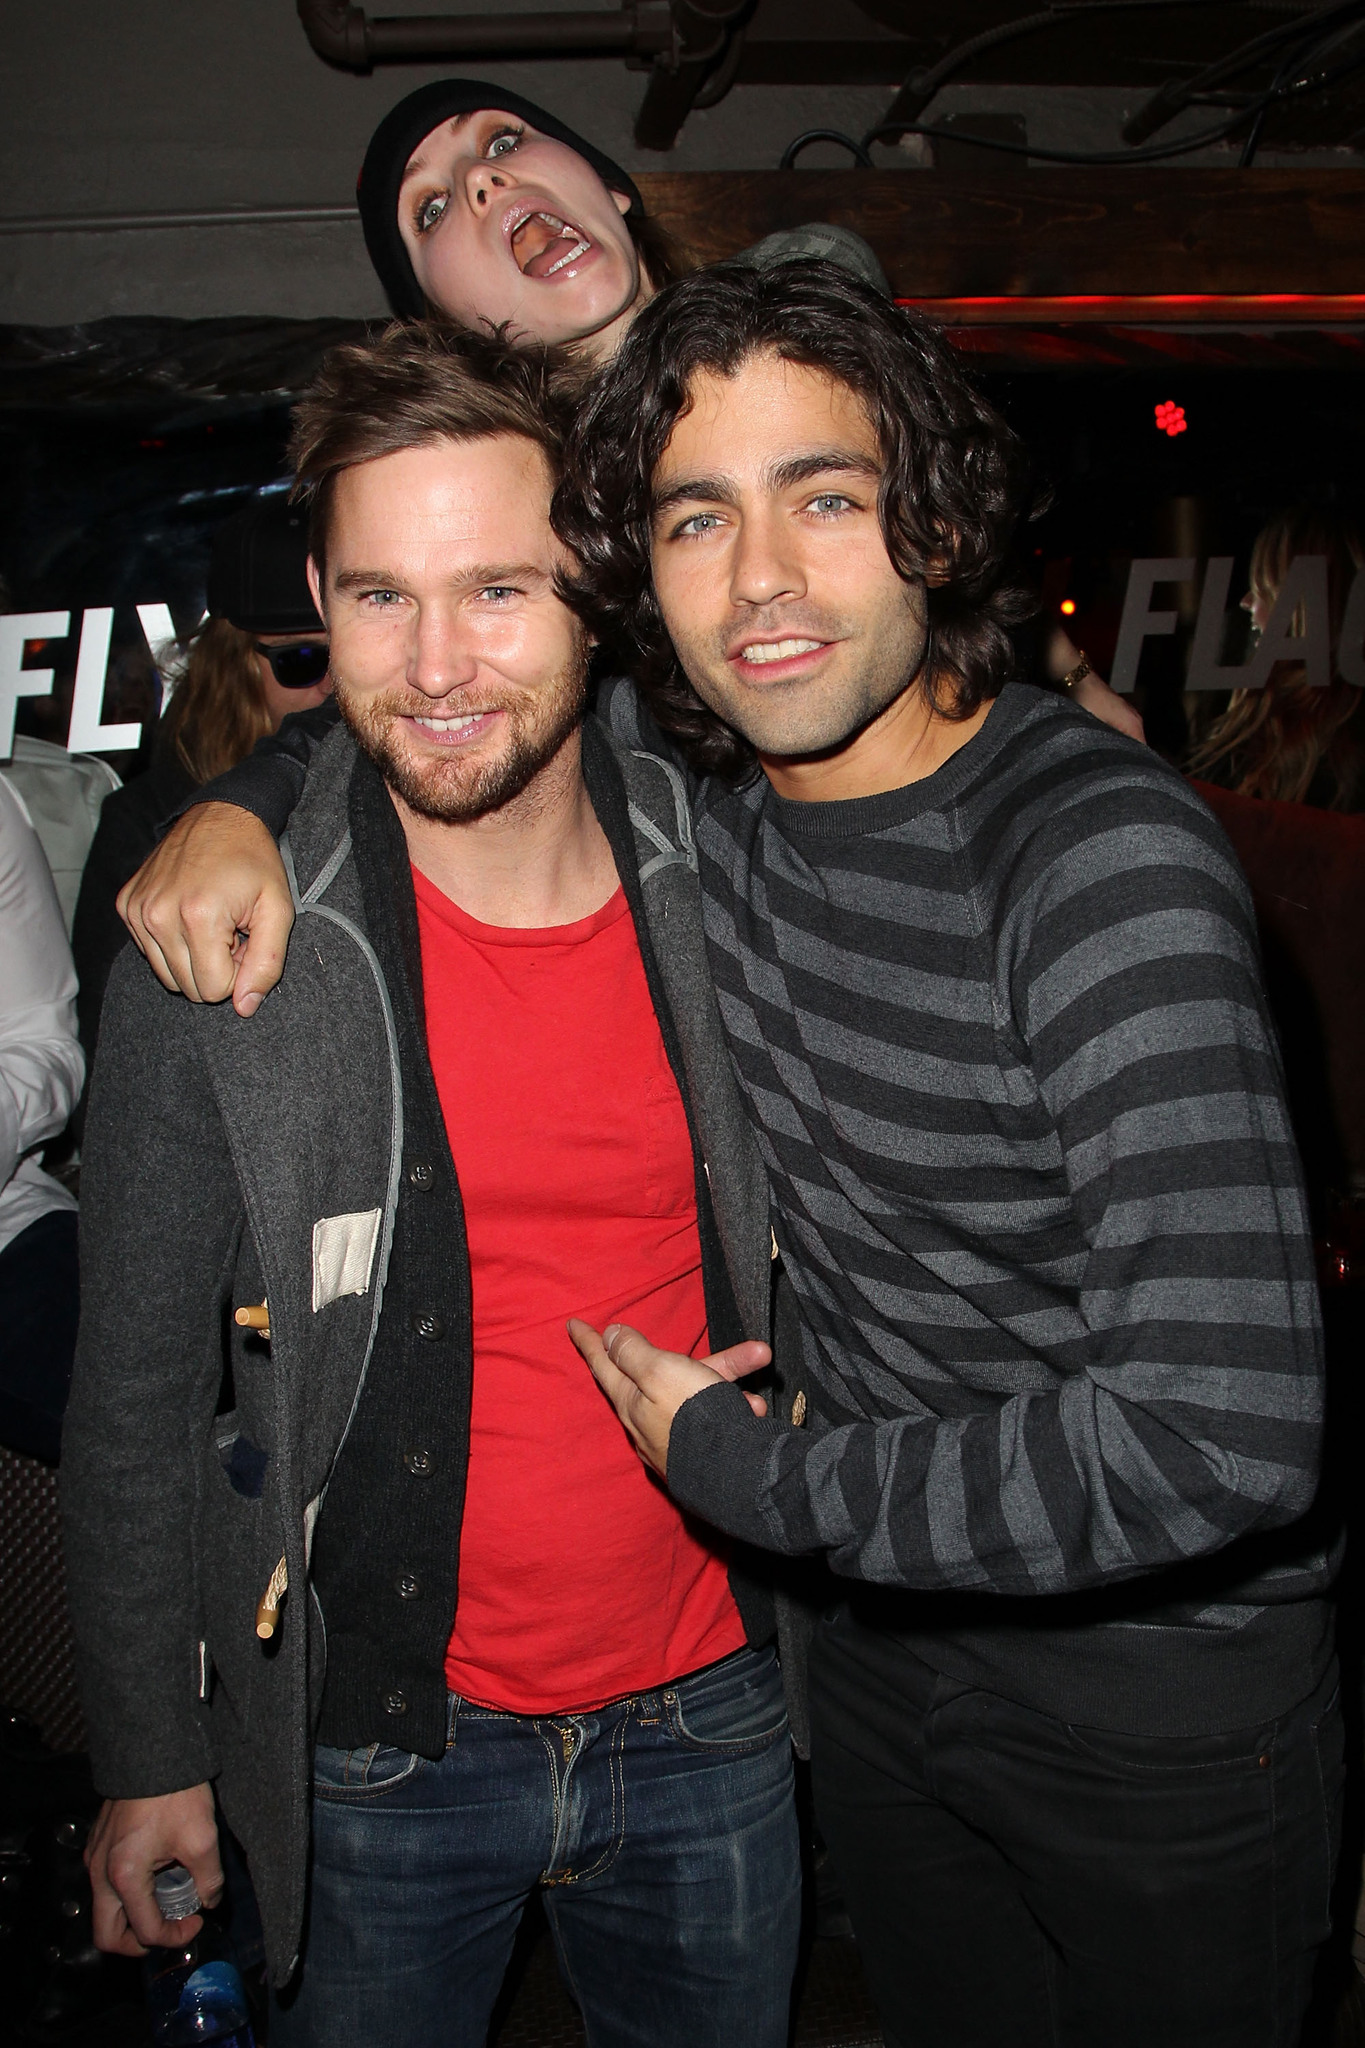 Brian Geraghty, Skylar Grey and Adrian Grenier at the Lil Jon Birthday Party at Downstairs Bar on January 17, 2013 in Park City, Utah.